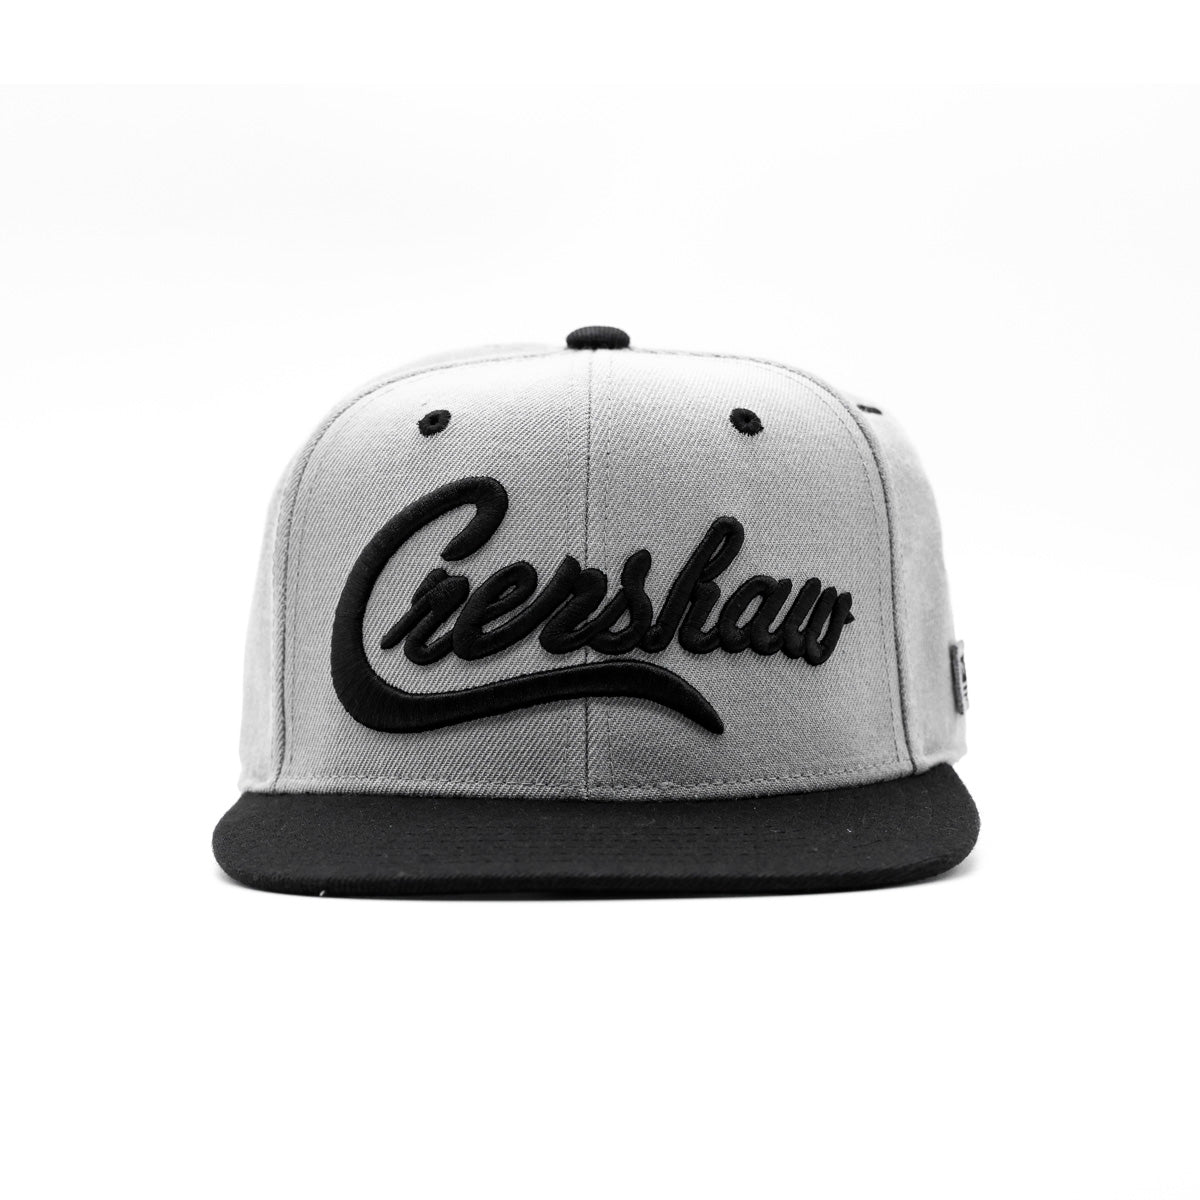 Crenshaw Limited Edition Snapback - Grey/Black [Two-Tone] - Front